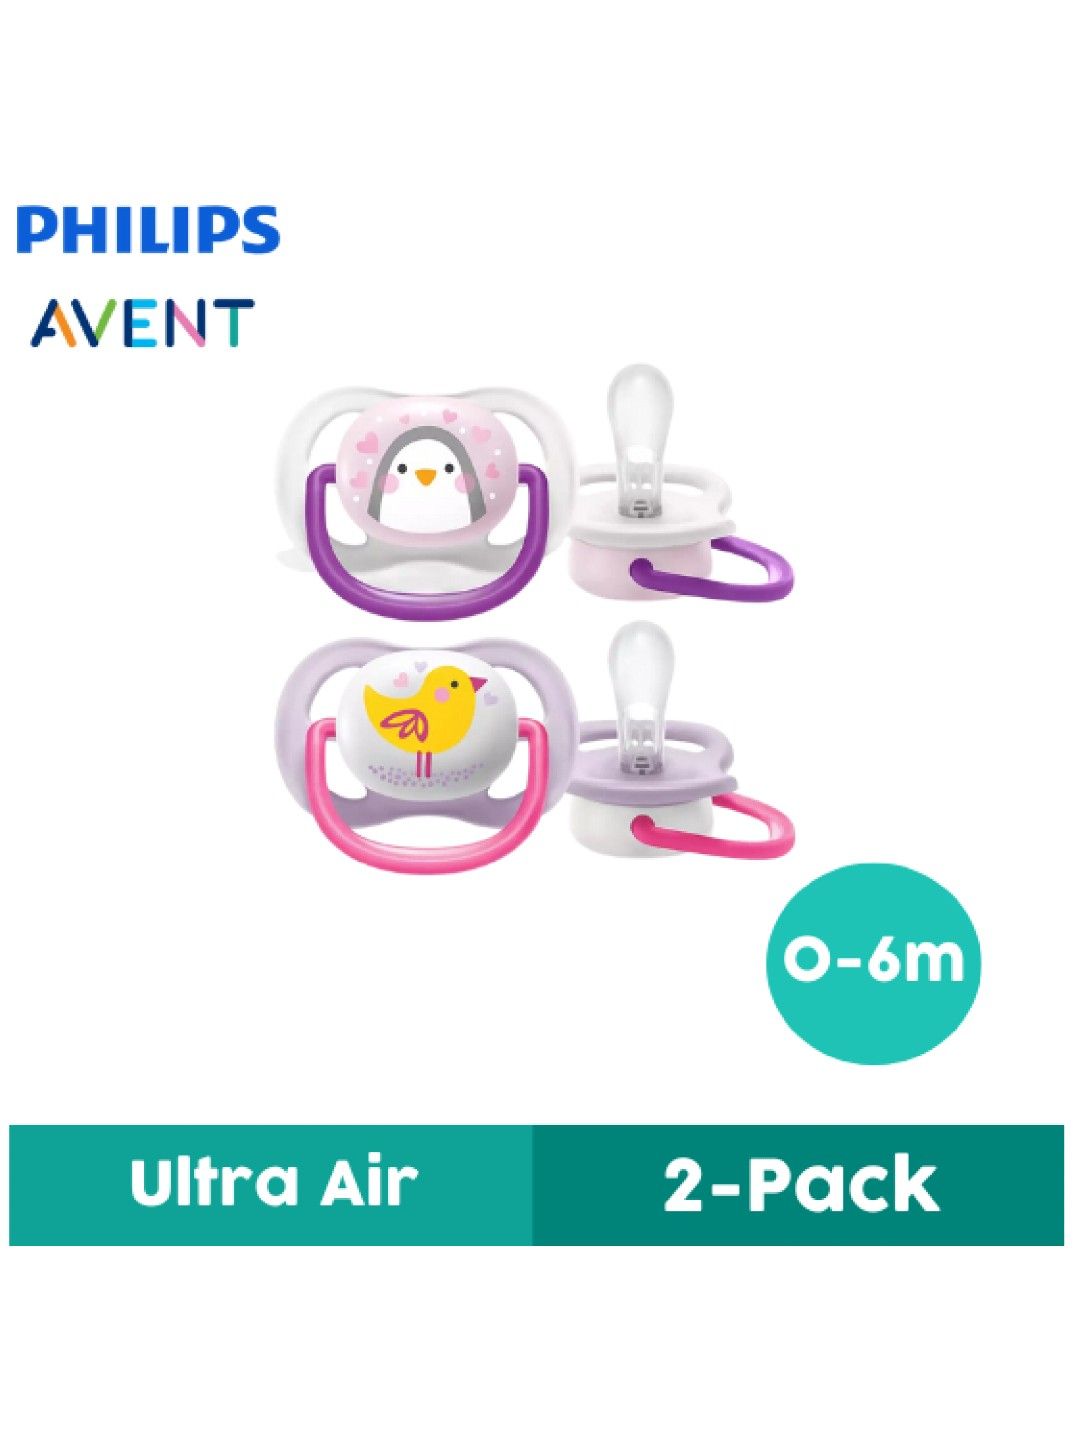 Avent Philips Avent 0-6M Ultra Air Pacifier (2-pack)